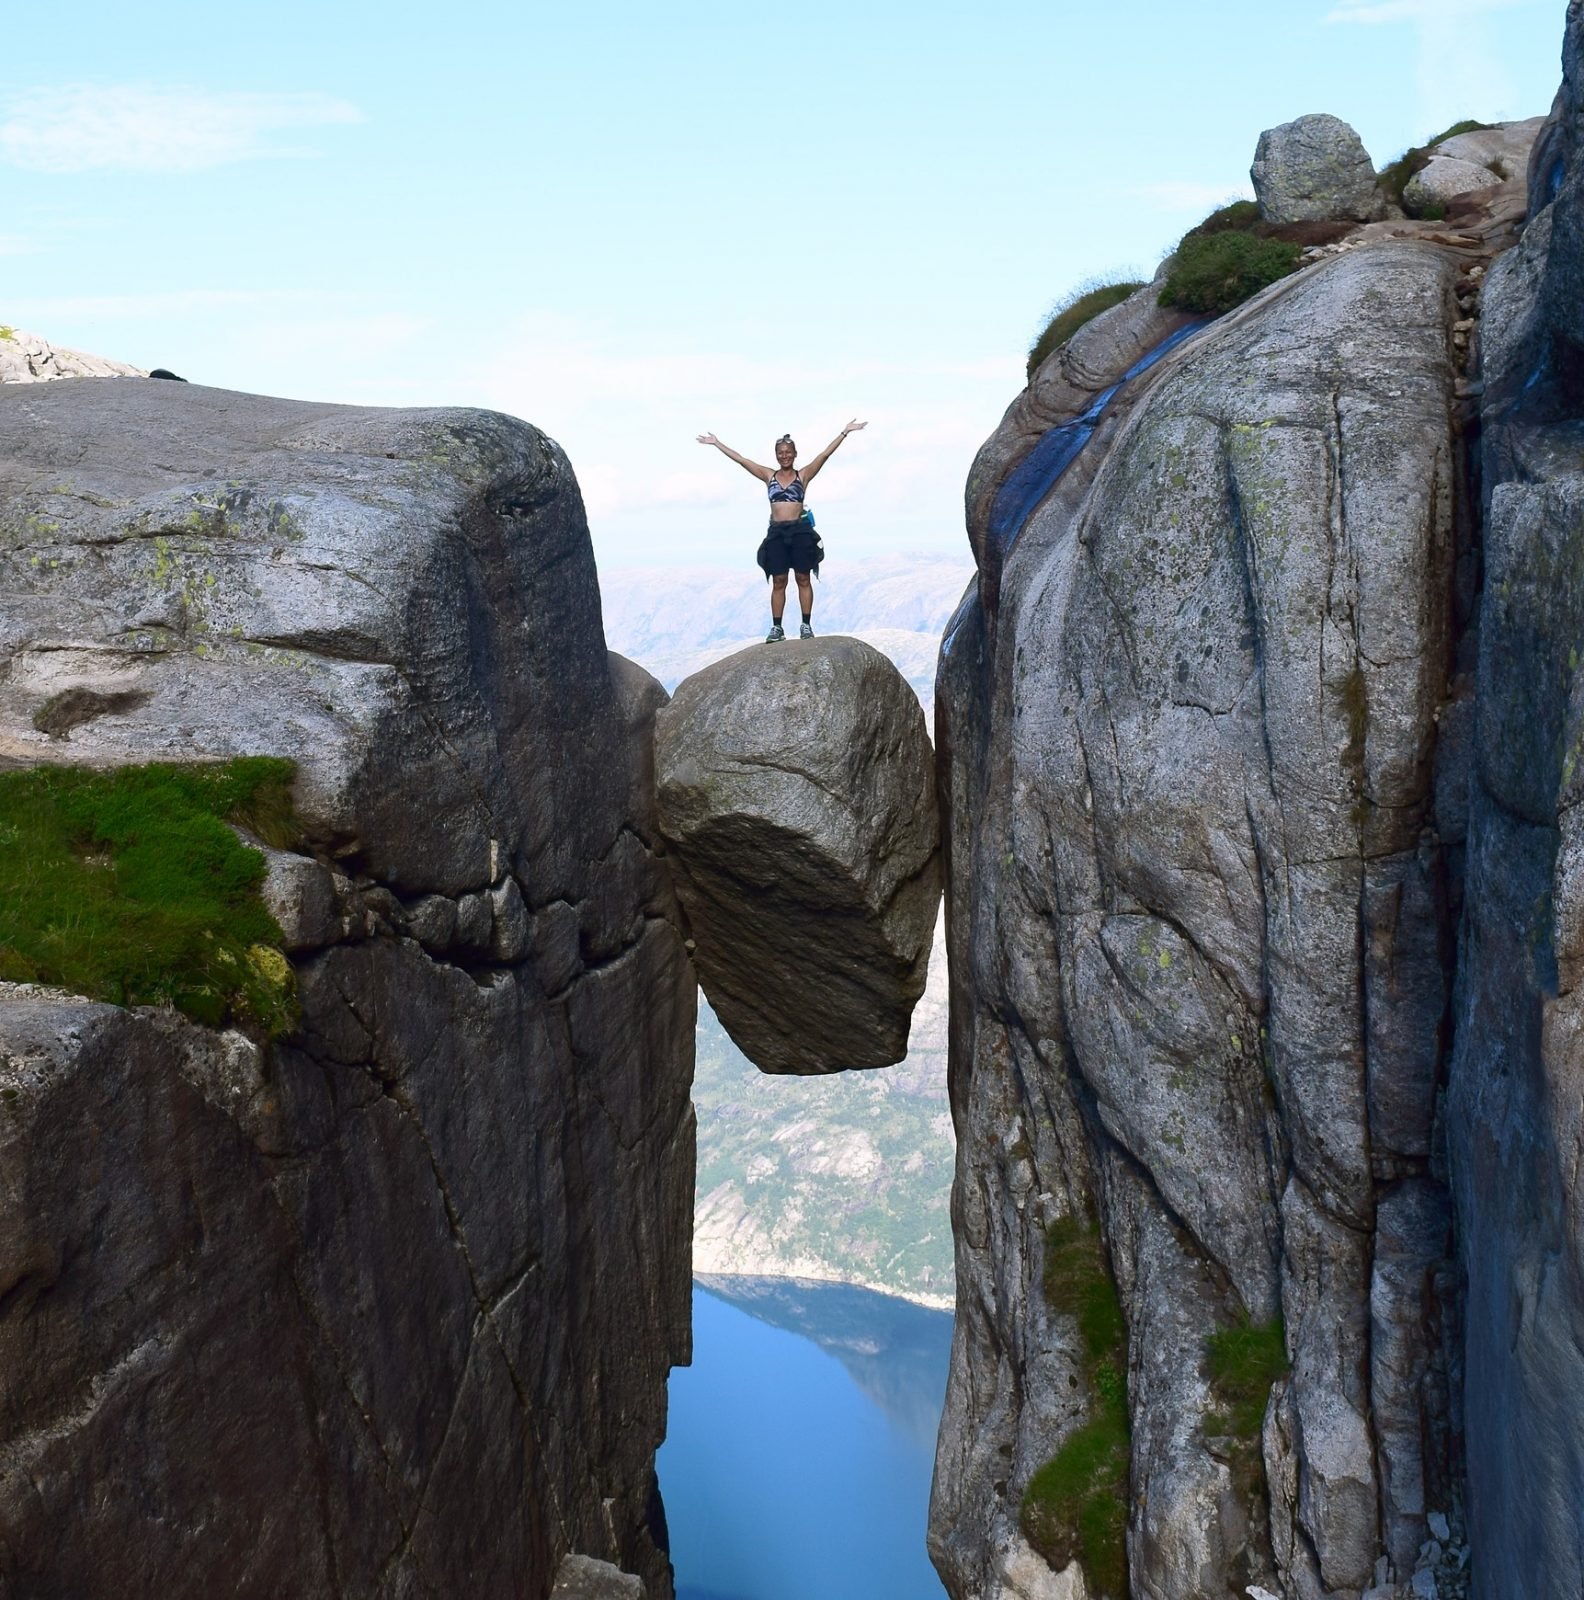 A tourist poses for a photo on a boulder jammed between two mountains in Kjeragbolten, Norway